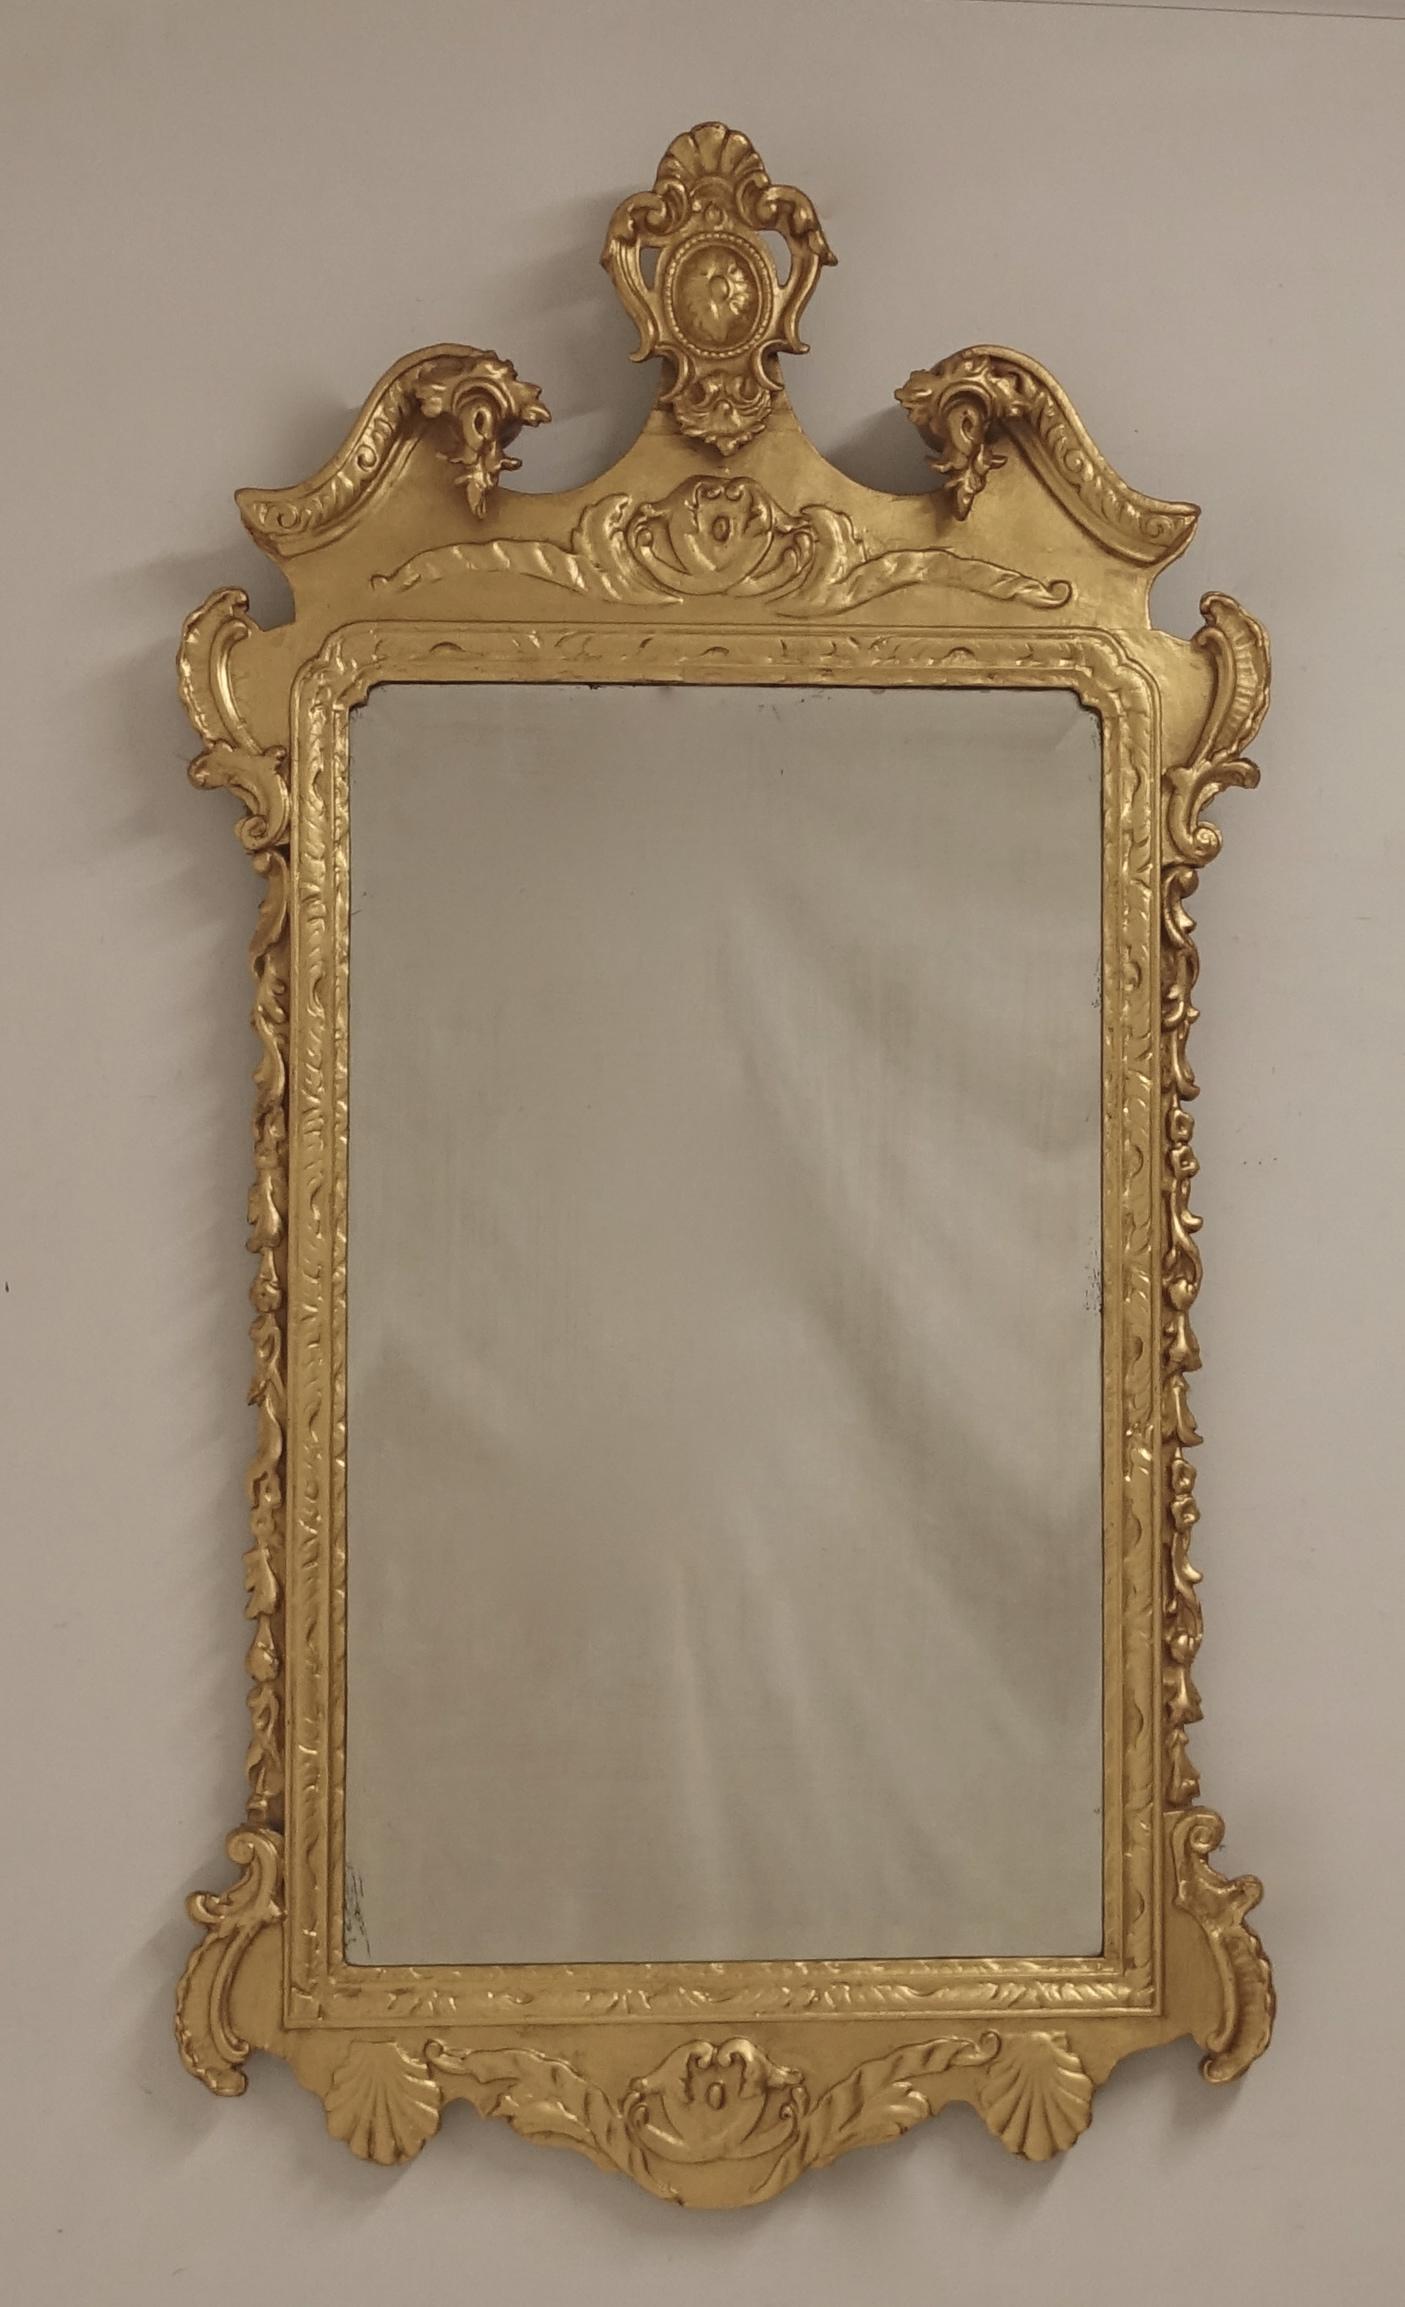 Mid-19th century English gilt wood wall or over mantle mirror in the Georgian style with original mirror plate.
Gilding refreshed in the 20th century.
In very good antique condition.